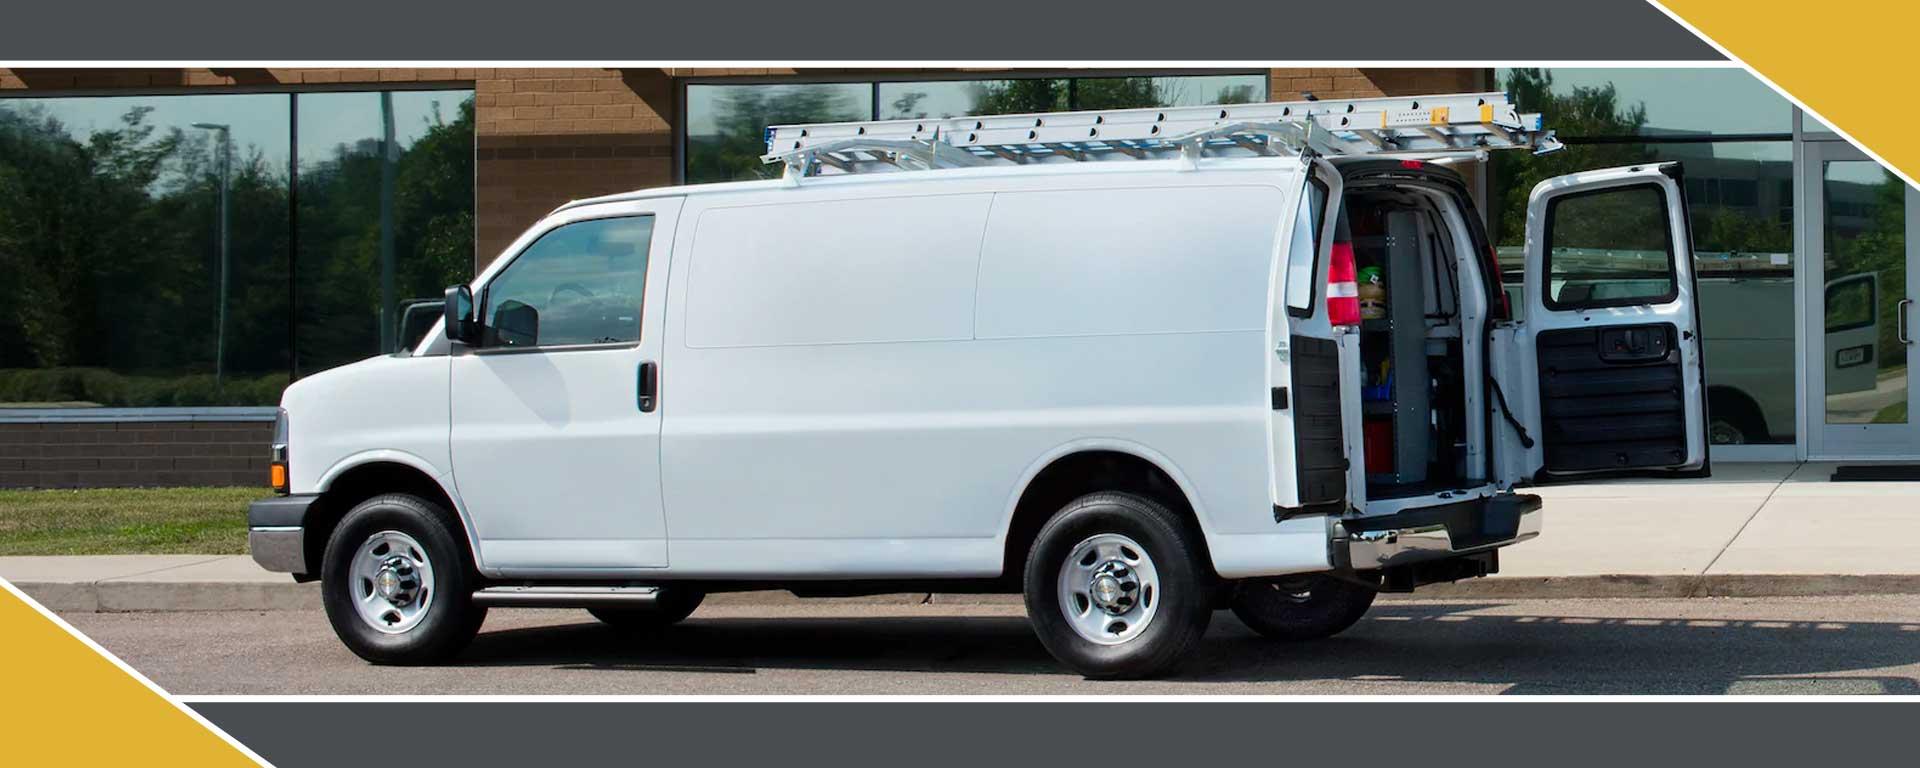 2021 Chevy Express Cargo Van For Sale in OH | 2500, 3500 & Extended